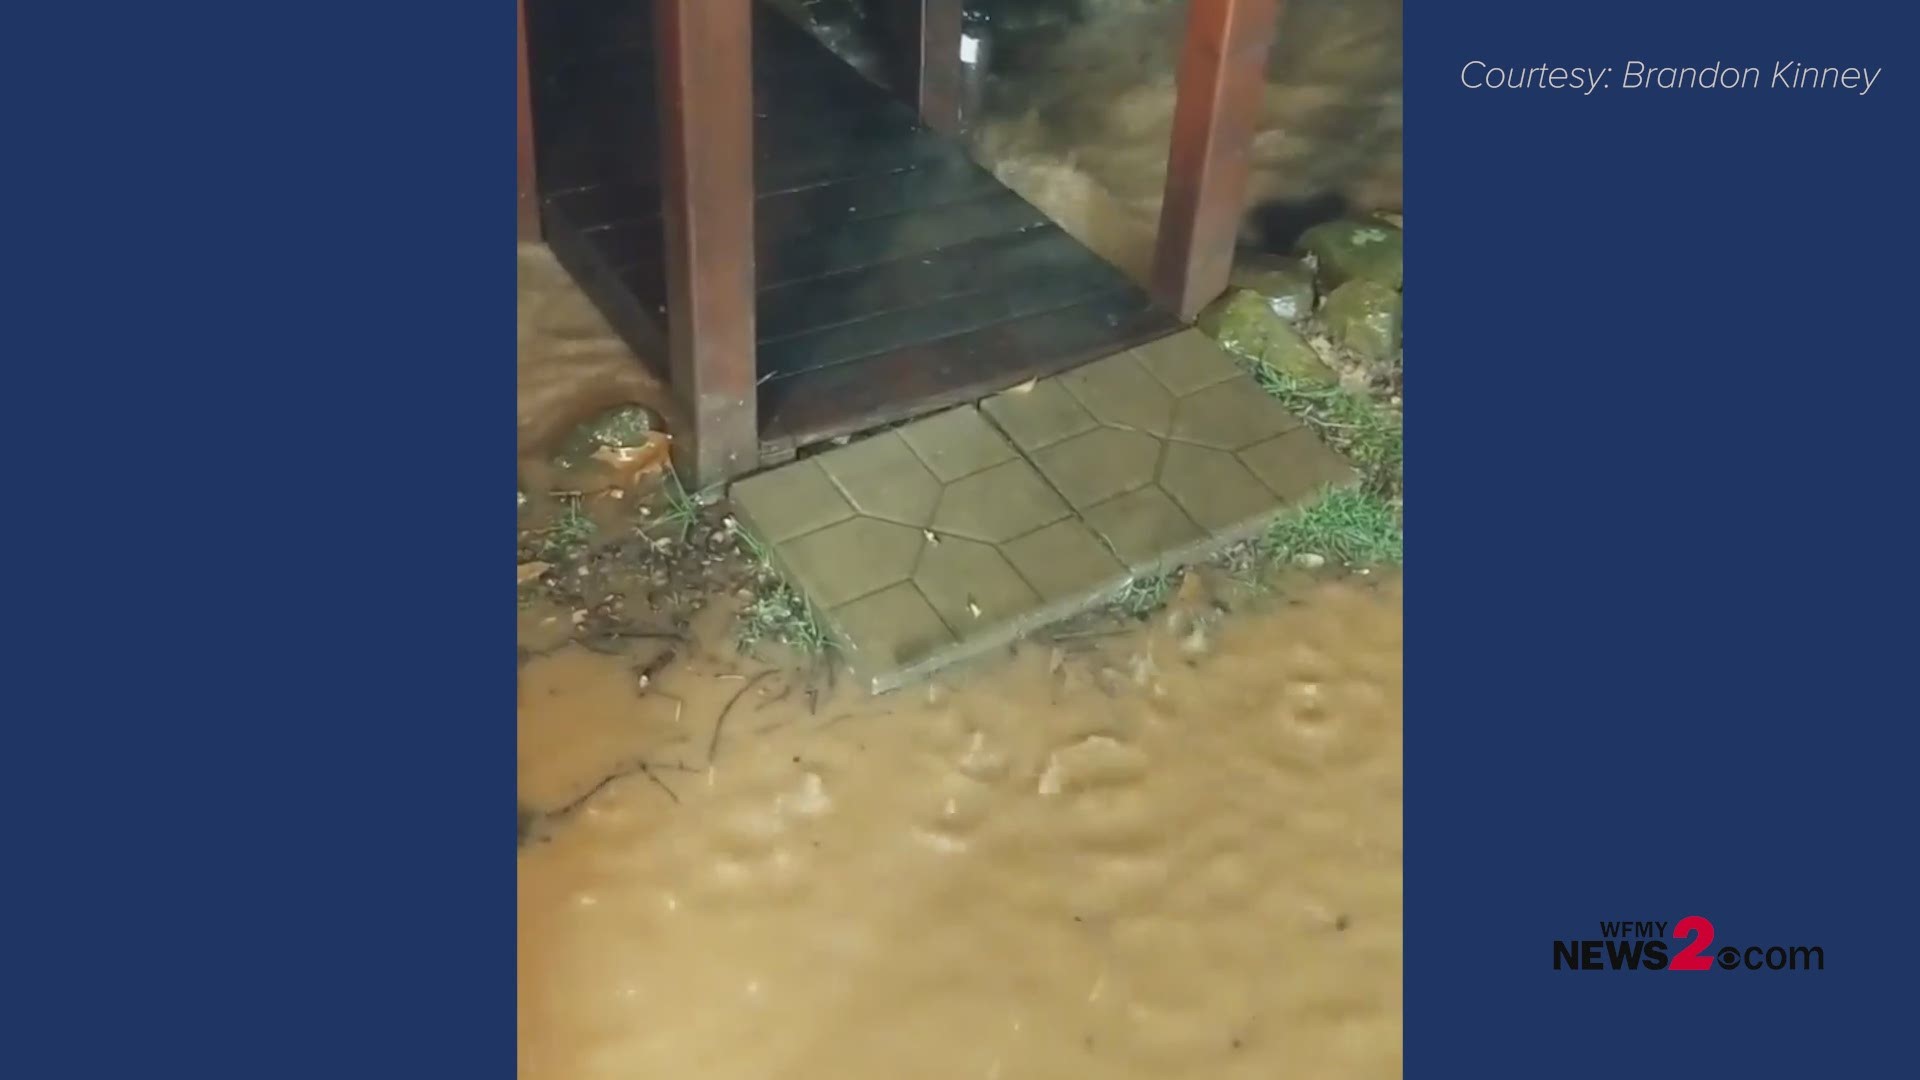 Brandon Kinney captured this video in Grantville right outside of Asheboro, Friday night. They had more than two inches of rain for the day.